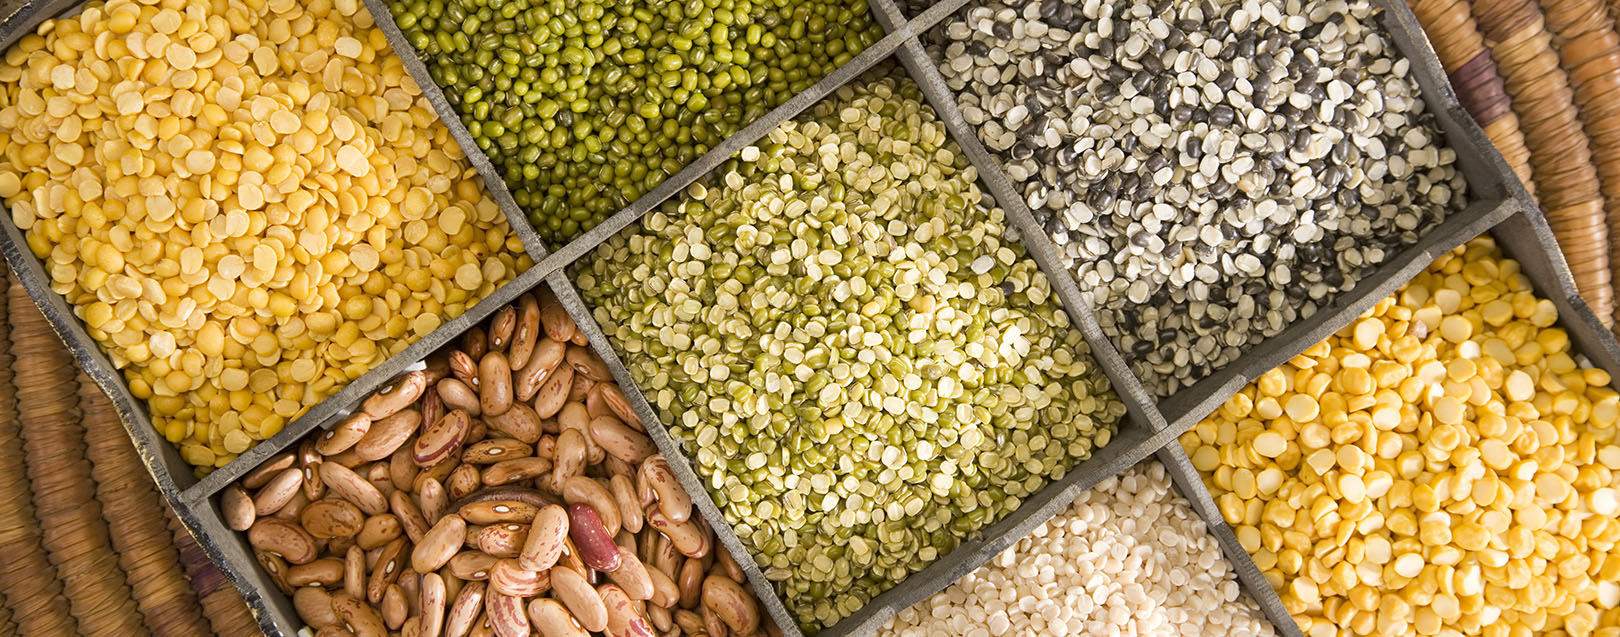 Govt to import additional 30,000 tonnes of pulses 